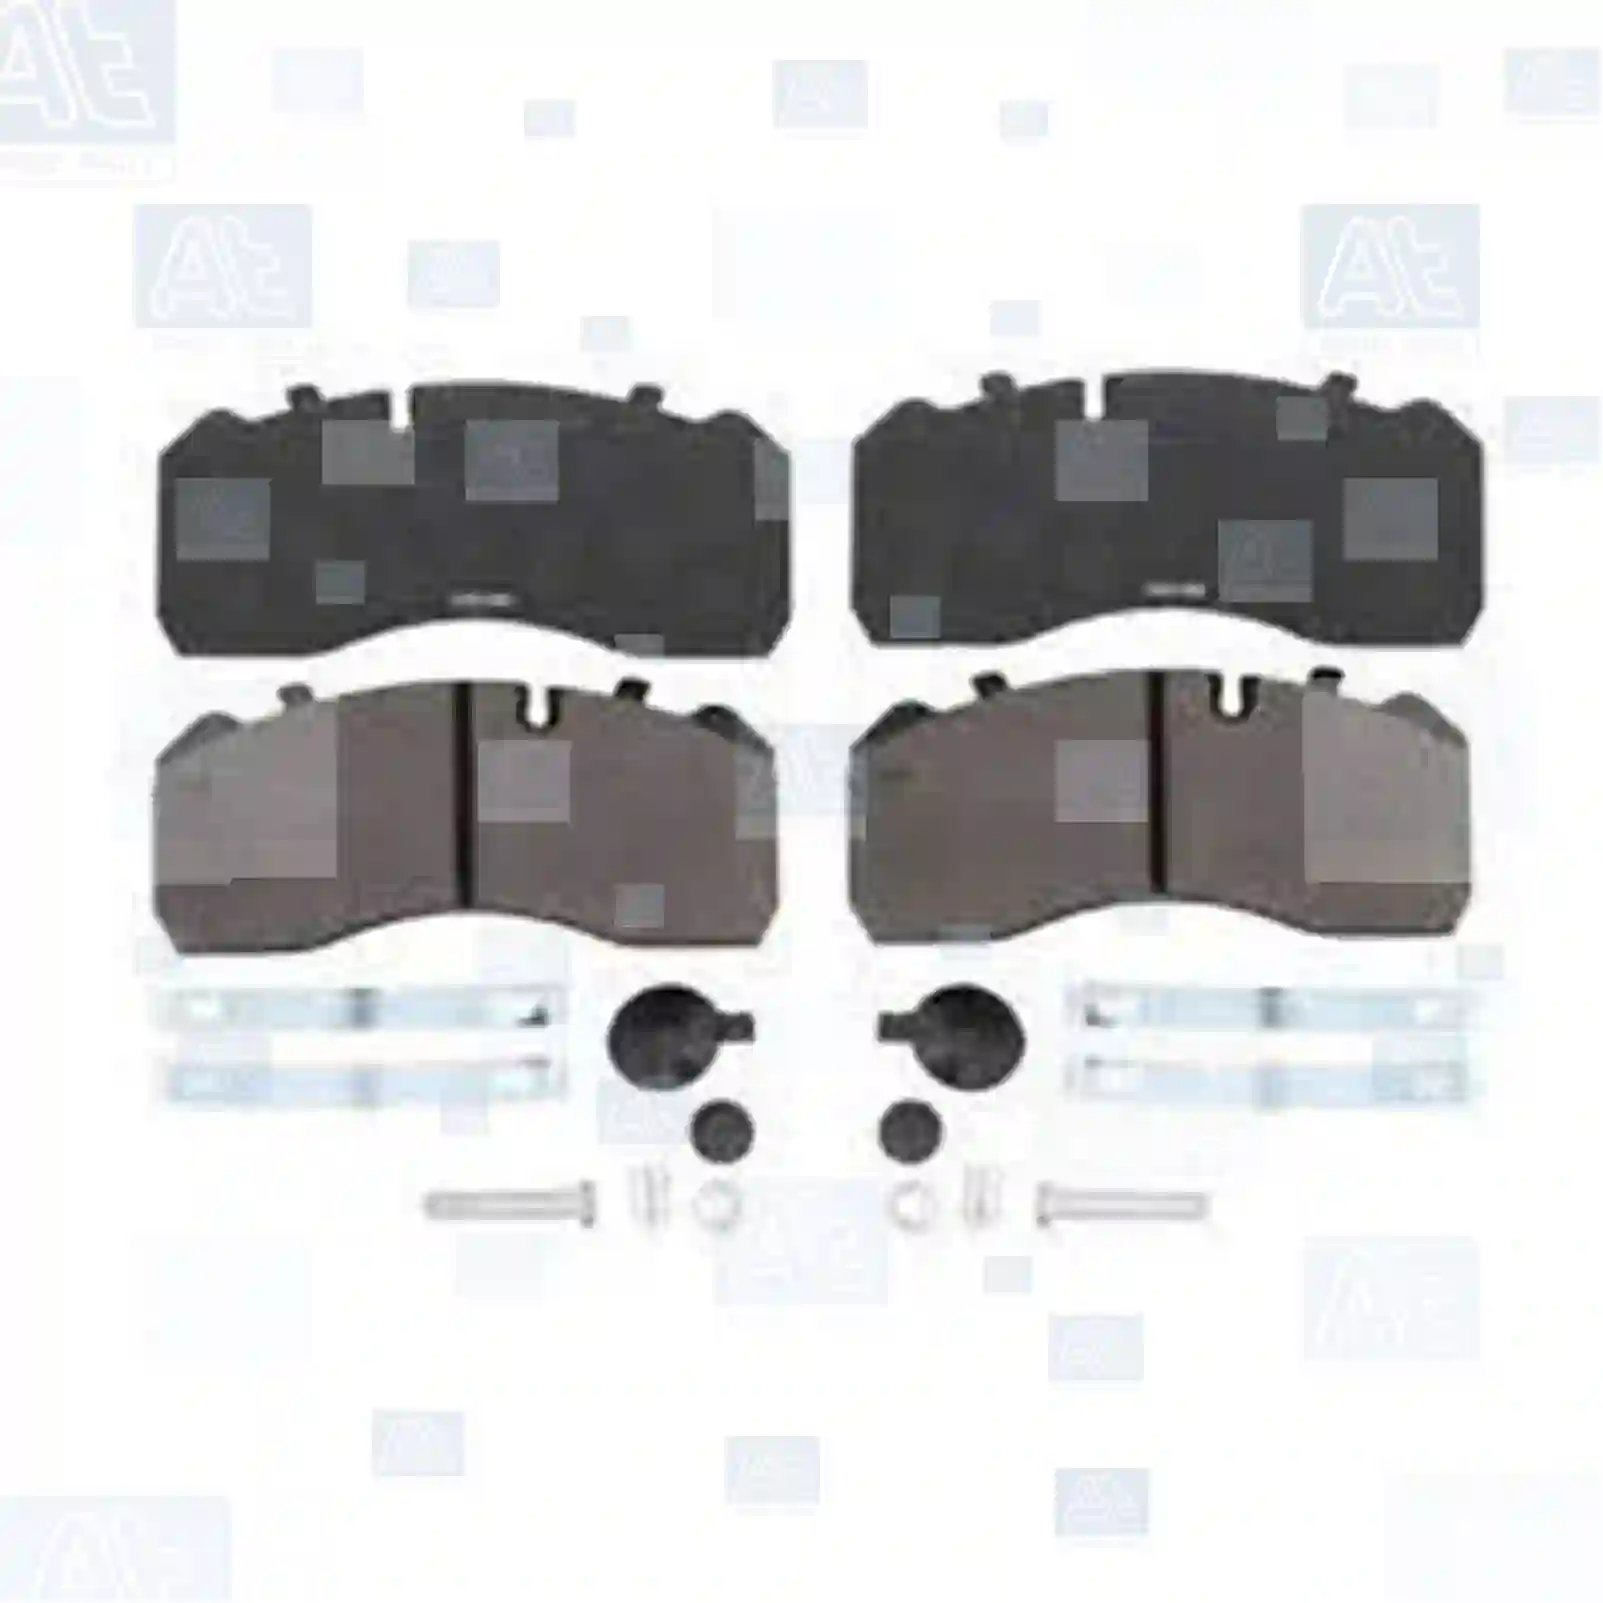 Disc brake pad kit, 77713653, 0020311500, 0020311600, 0203121600, 1519637, 1529337, 908142, 02992336, 02996468, M91000101, 709291073, 9291073, M91000101, 9291024, 02992336, 02996468, 2992336, 2996468, 500055019, 500086004, JAE0250407820, 08158206008, 81508205035, 81508205082, 81508205093, 81508206008, 81508206022, 81508206057, 81508206058, 81508206059, 81508206060, 81508206064, 0004210710, 0004210810, 0004215010, 0004215110, 0014210710, 0014211710, 0024207820, 0024207828, 0024207920, 0044201320, 0054202320, 0084205820, 0084205920, 6864200020, 3057007800, 3057007801, 4057427800, 37779813840, 377800062, 1087988, 41142152, ZG50419-0008 ||  77713653 At Spare Part | Engine, Accelerator Pedal, Camshaft, Connecting Rod, Crankcase, Crankshaft, Cylinder Head, Engine Suspension Mountings, Exhaust Manifold, Exhaust Gas Recirculation, Filter Kits, Flywheel Housing, General Overhaul Kits, Engine, Intake Manifold, Oil Cleaner, Oil Cooler, Oil Filter, Oil Pump, Oil Sump, Piston & Liner, Sensor & Switch, Timing Case, Turbocharger, Cooling System, Belt Tensioner, Coolant Filter, Coolant Pipe, Corrosion Prevention Agent, Drive, Expansion Tank, Fan, Intercooler, Monitors & Gauges, Radiator, Thermostat, V-Belt / Timing belt, Water Pump, Fuel System, Electronical Injector Unit, Feed Pump, Fuel Filter, cpl., Fuel Gauge Sender,  Fuel Line, Fuel Pump, Fuel Tank, Injection Line Kit, Injection Pump, Exhaust System, Clutch & Pedal, Gearbox, Propeller Shaft, Axles, Brake System, Hubs & Wheels, Suspension, Leaf Spring, Universal Parts / Accessories, Steering, Electrical System, Cabin Disc brake pad kit, 77713653, 0020311500, 0020311600, 0203121600, 1519637, 1529337, 908142, 02992336, 02996468, M91000101, 709291073, 9291073, M91000101, 9291024, 02992336, 02996468, 2992336, 2996468, 500055019, 500086004, JAE0250407820, 08158206008, 81508205035, 81508205082, 81508205093, 81508206008, 81508206022, 81508206057, 81508206058, 81508206059, 81508206060, 81508206064, 0004210710, 0004210810, 0004215010, 0004215110, 0014210710, 0014211710, 0024207820, 0024207828, 0024207920, 0044201320, 0054202320, 0084205820, 0084205920, 6864200020, 3057007800, 3057007801, 4057427800, 37779813840, 377800062, 1087988, 41142152, ZG50419-0008 ||  77713653 At Spare Part | Engine, Accelerator Pedal, Camshaft, Connecting Rod, Crankcase, Crankshaft, Cylinder Head, Engine Suspension Mountings, Exhaust Manifold, Exhaust Gas Recirculation, Filter Kits, Flywheel Housing, General Overhaul Kits, Engine, Intake Manifold, Oil Cleaner, Oil Cooler, Oil Filter, Oil Pump, Oil Sump, Piston & Liner, Sensor & Switch, Timing Case, Turbocharger, Cooling System, Belt Tensioner, Coolant Filter, Coolant Pipe, Corrosion Prevention Agent, Drive, Expansion Tank, Fan, Intercooler, Monitors & Gauges, Radiator, Thermostat, V-Belt / Timing belt, Water Pump, Fuel System, Electronical Injector Unit, Feed Pump, Fuel Filter, cpl., Fuel Gauge Sender,  Fuel Line, Fuel Pump, Fuel Tank, Injection Line Kit, Injection Pump, Exhaust System, Clutch & Pedal, Gearbox, Propeller Shaft, Axles, Brake System, Hubs & Wheels, Suspension, Leaf Spring, Universal Parts / Accessories, Steering, Electrical System, Cabin